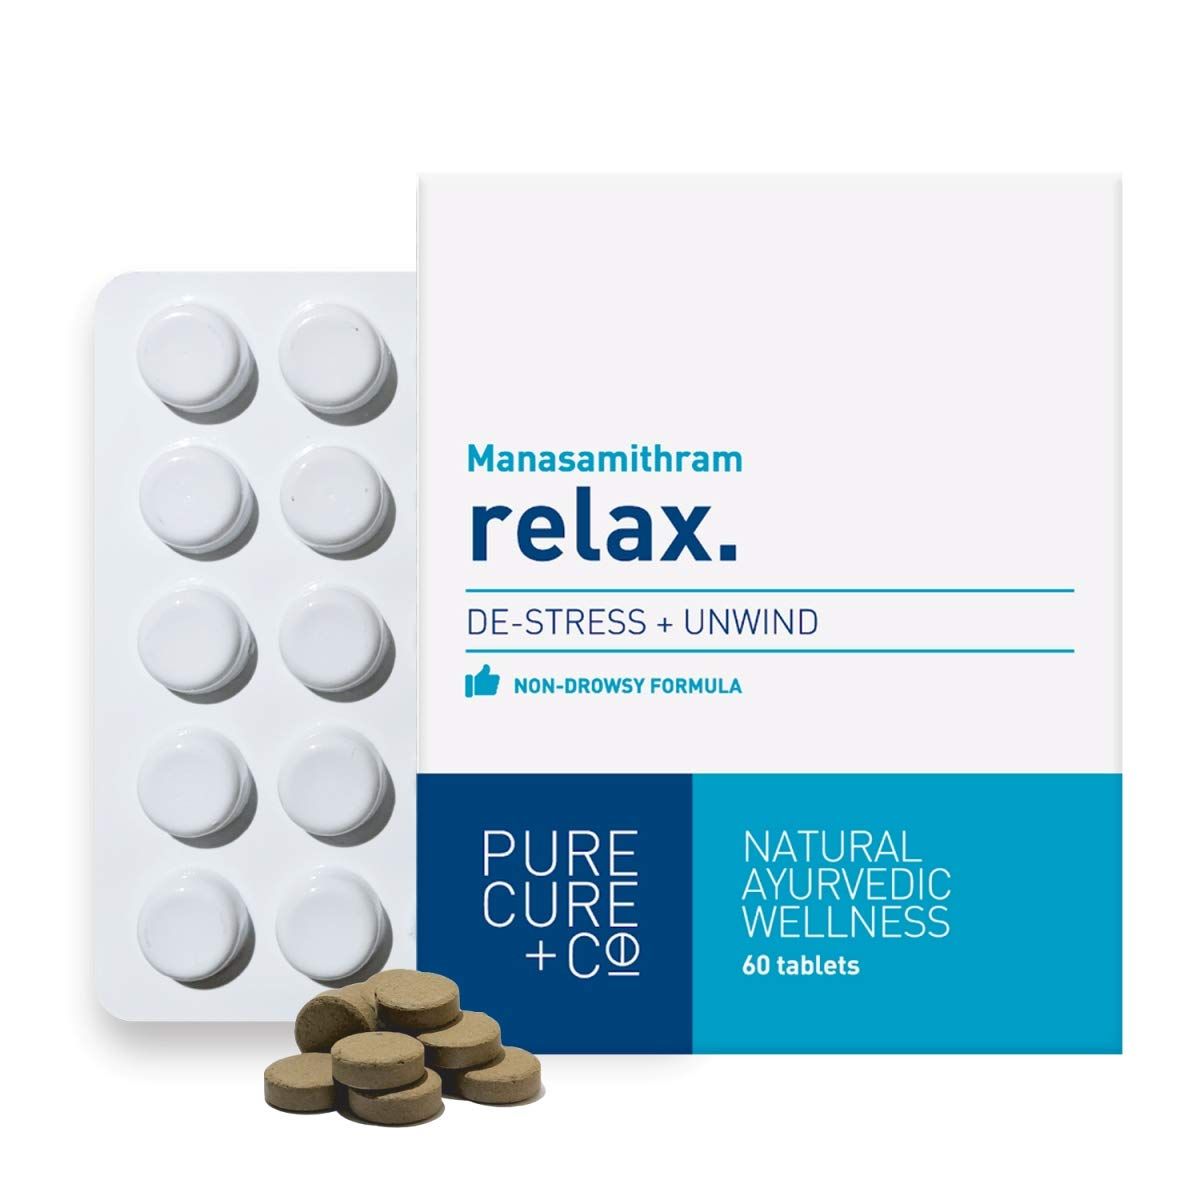 Pure Cure +Co Manasamitharam Relax Tablets Image